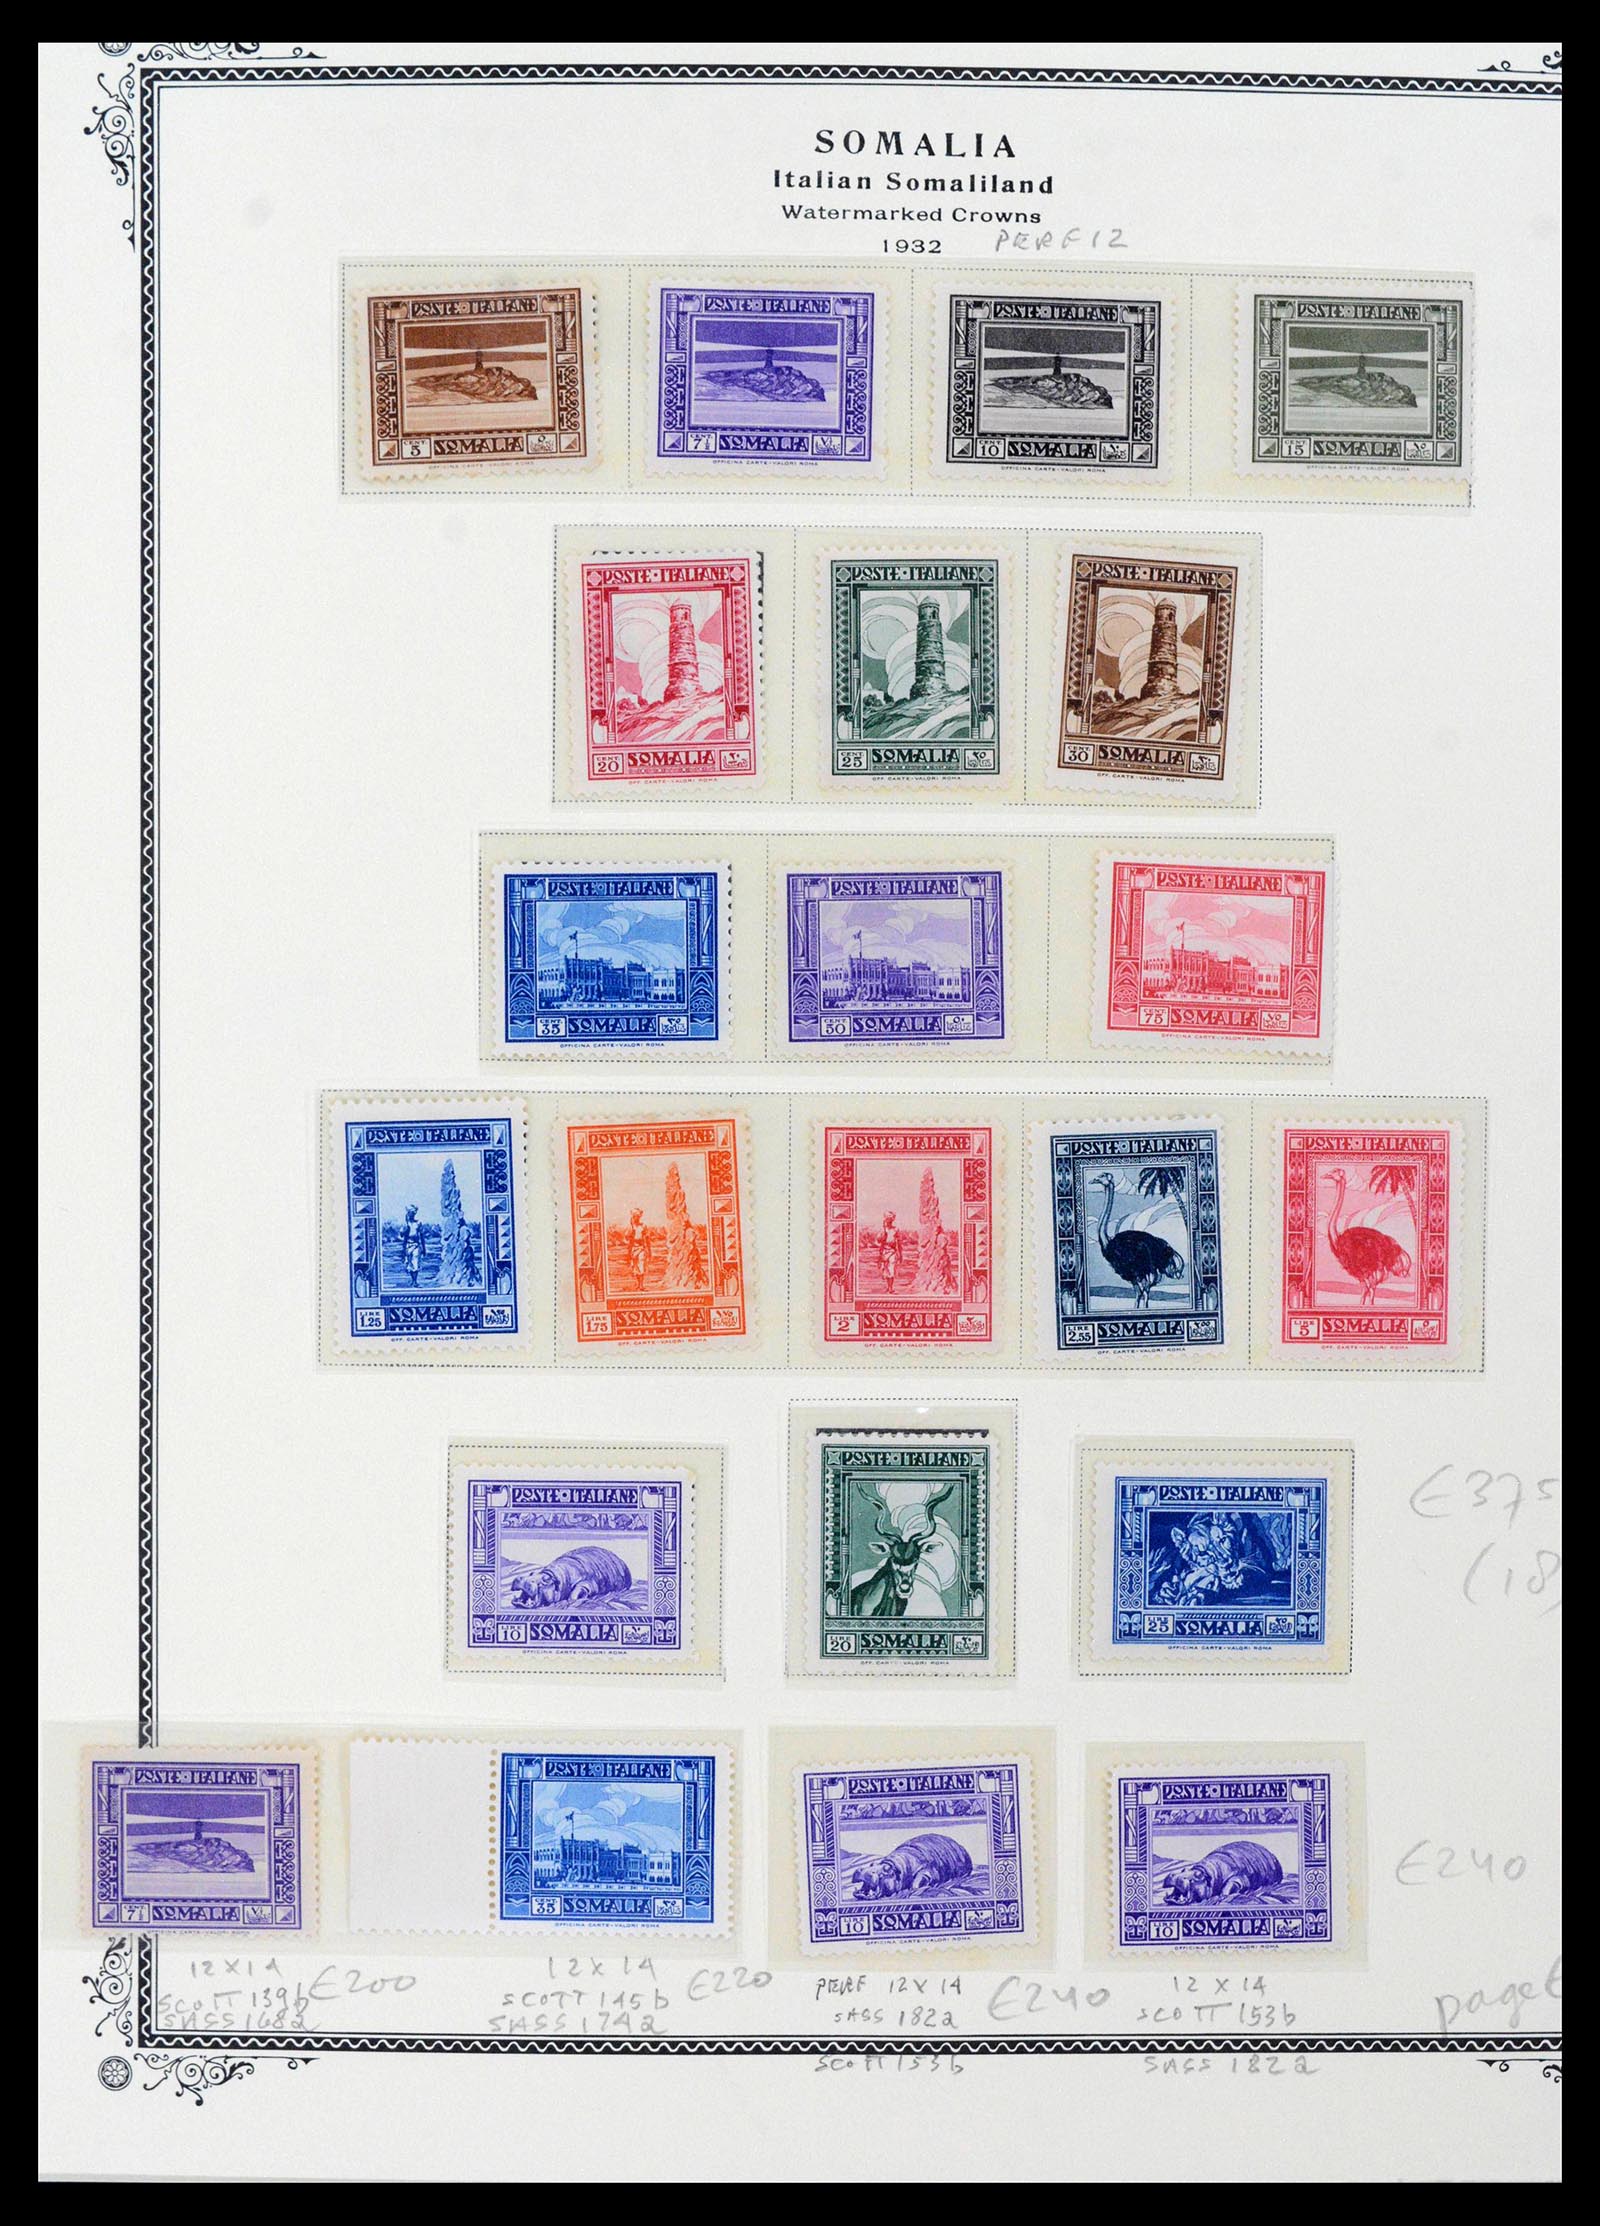 39011 0014 - Stamp collection 39011 Somalia complete 1903-1960.